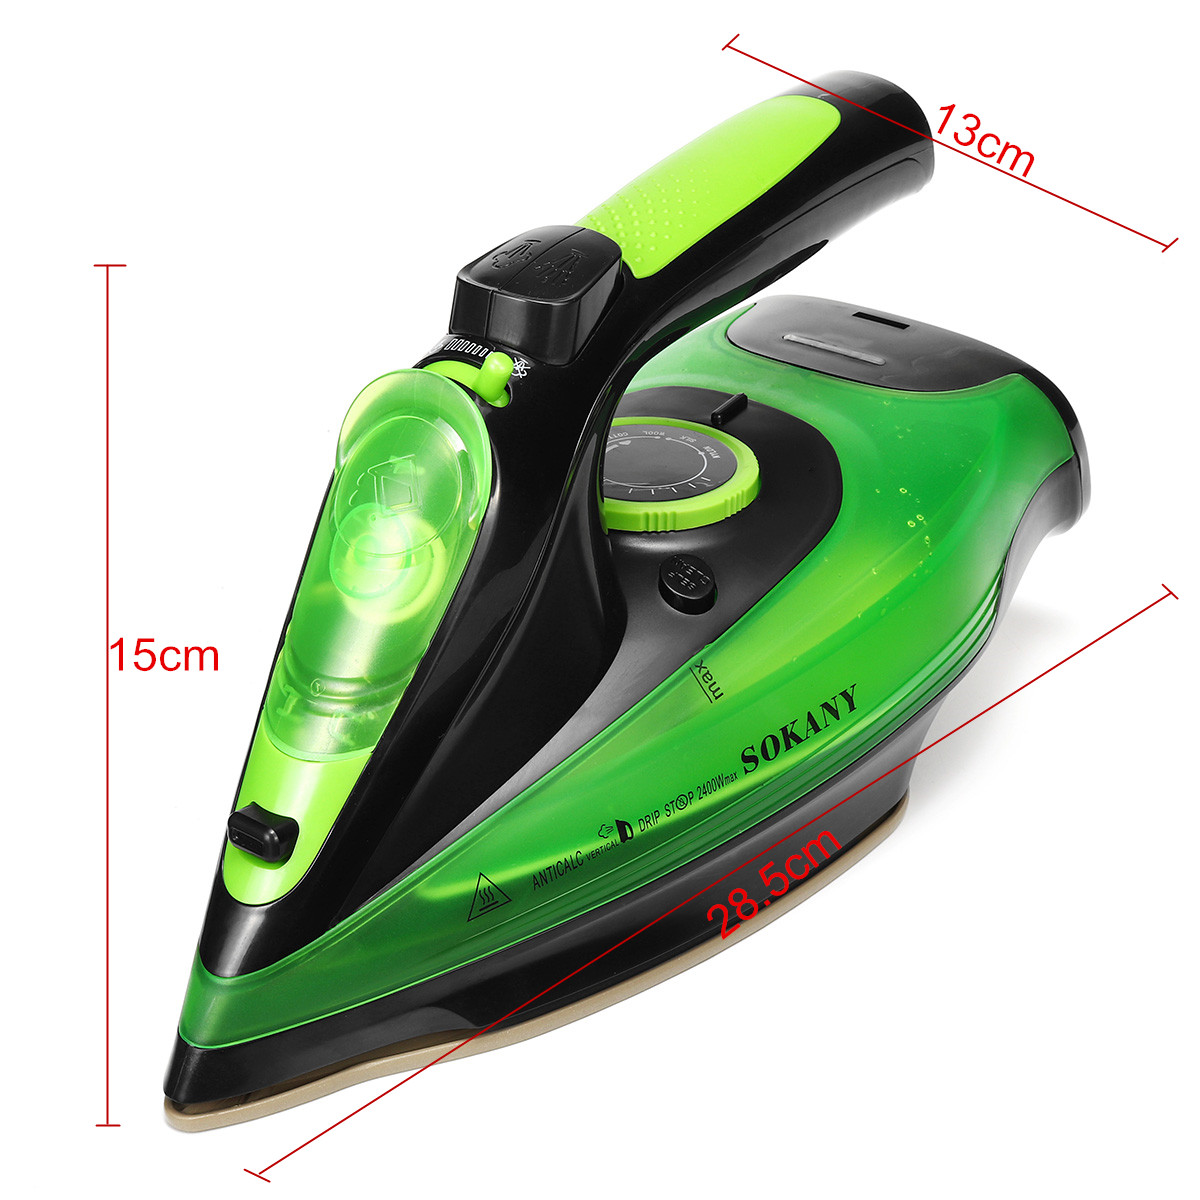 2400W-220V-Cordless-Steam-Iron-Multifunction-Clothes-Docking-Station-Dry-Ironing-Industry-1346803-10